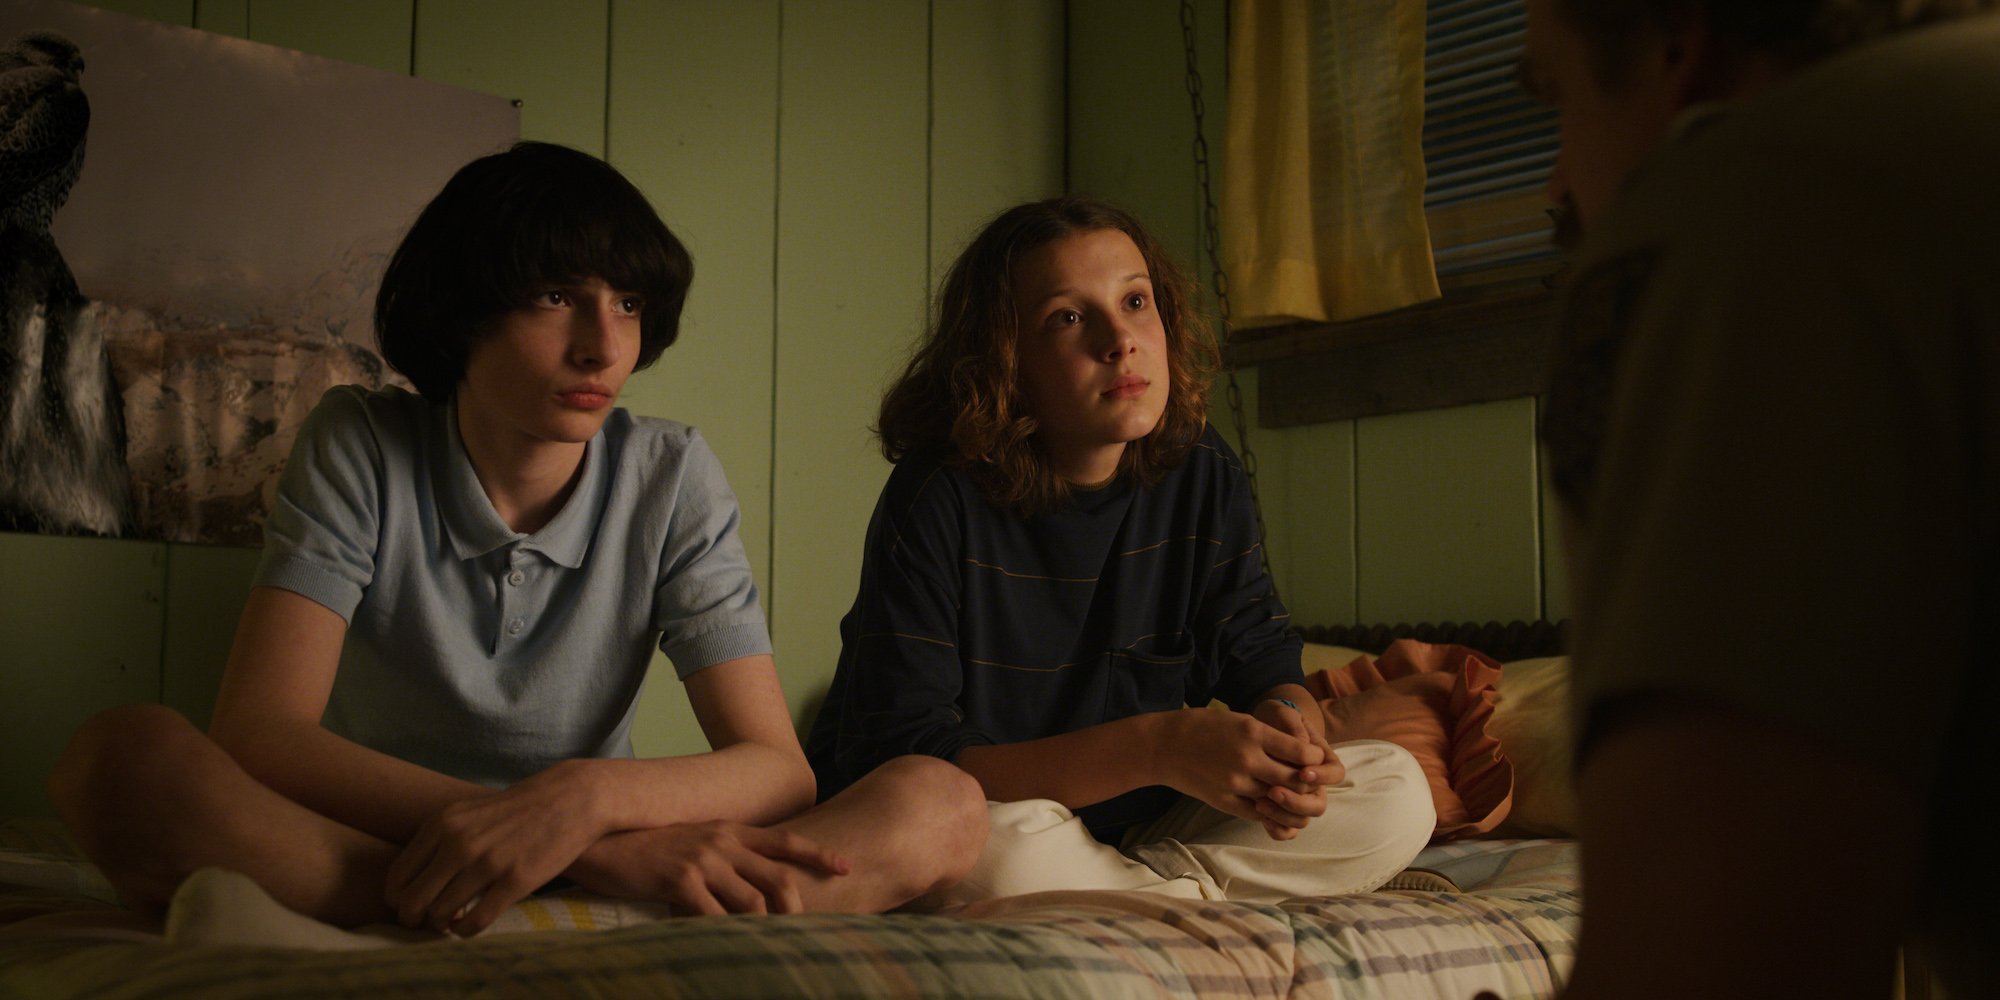 Mike and Eleven sit on her bed in a production still from Stranger Things Season 3.